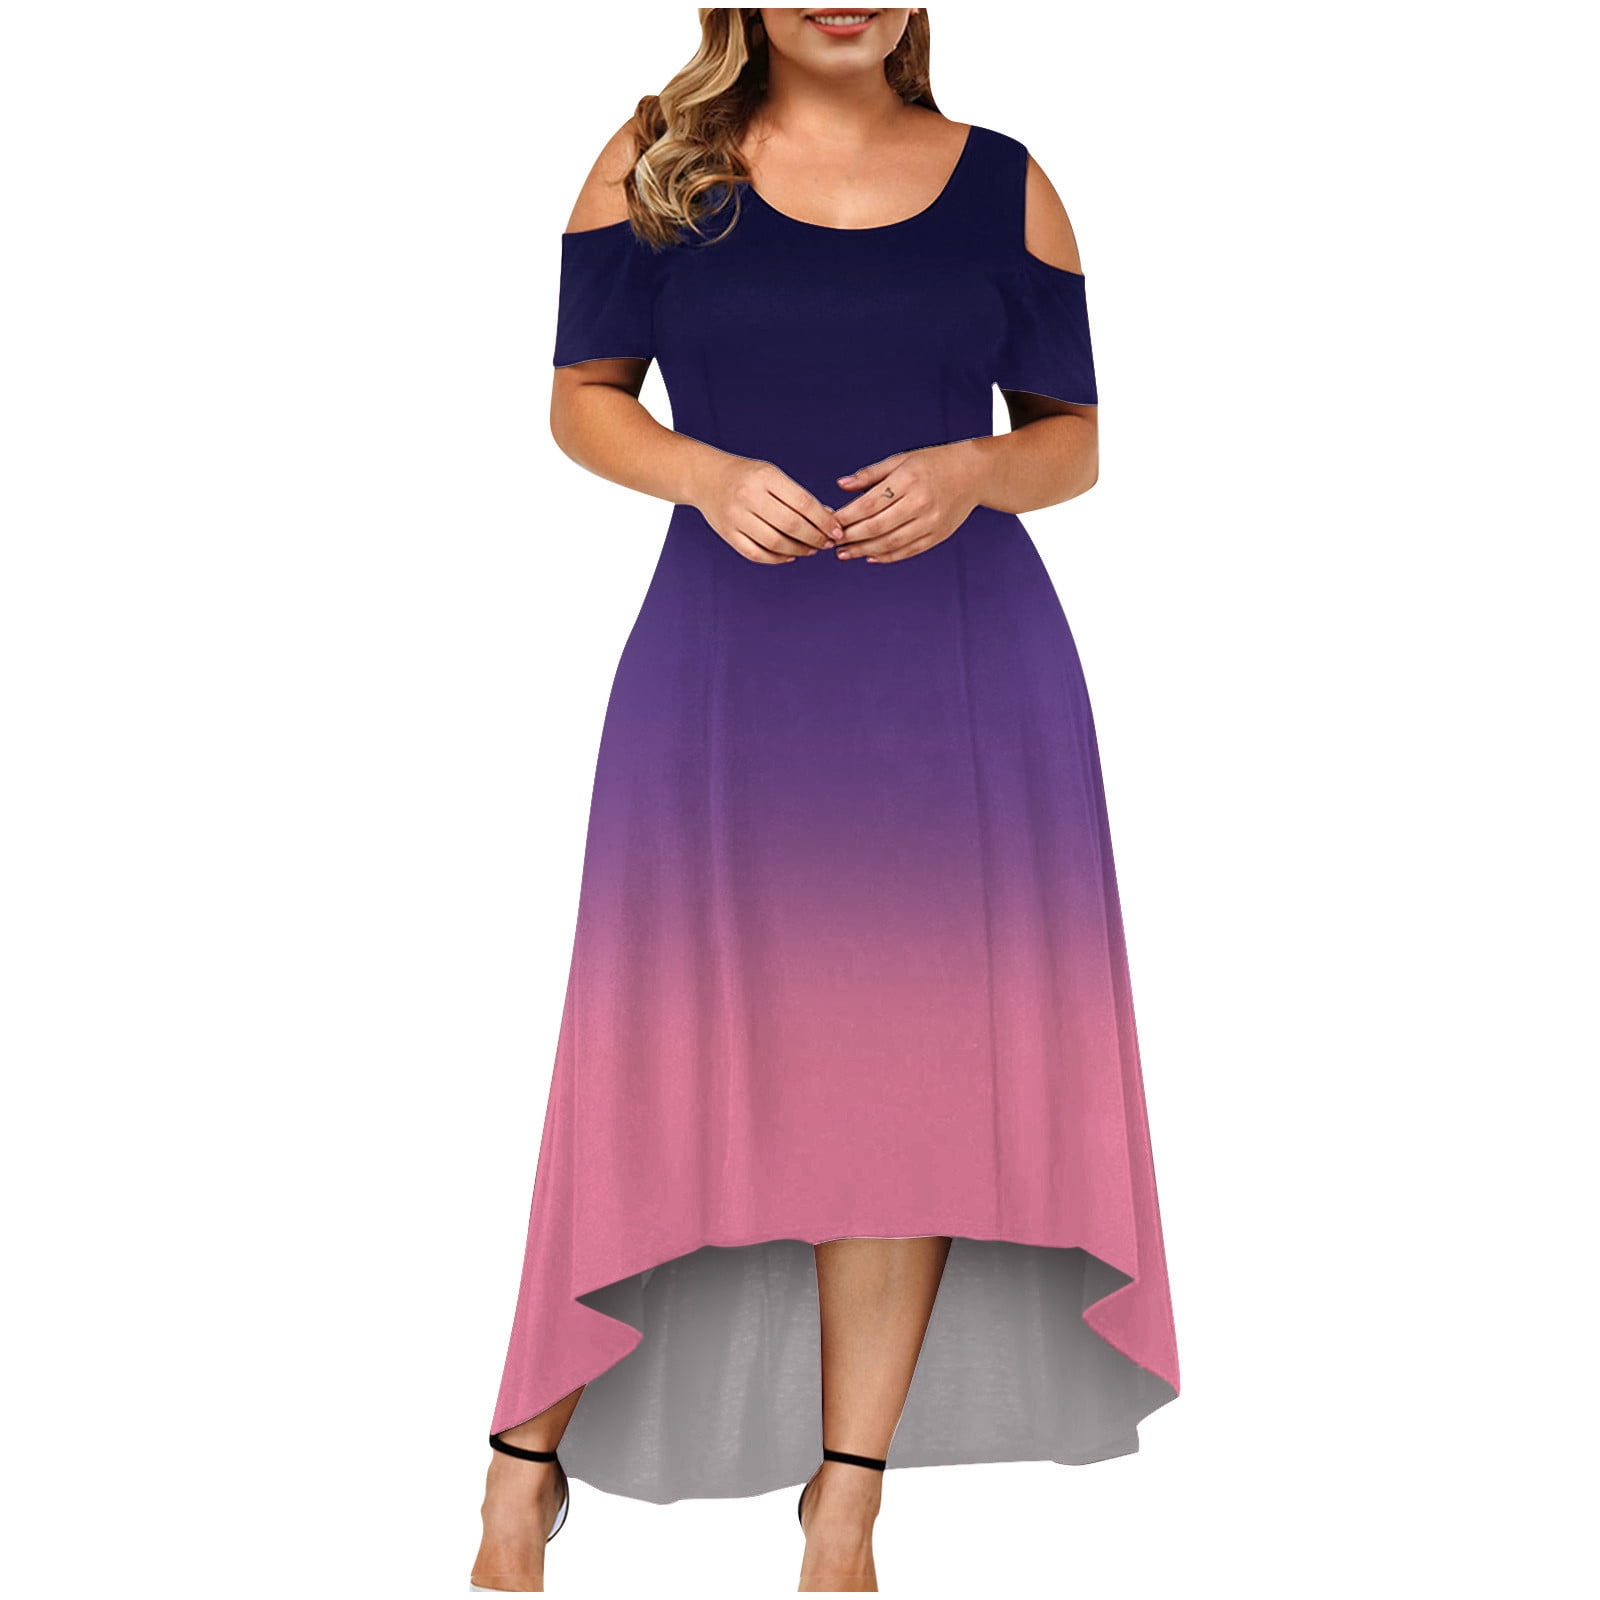 Woman Clothing Clearance Under $5,POROPL Summer Dresses for Women Plus Size  Sexy O-Neck Strapless Draw Back Lace Splicing Dress Purple Size 16